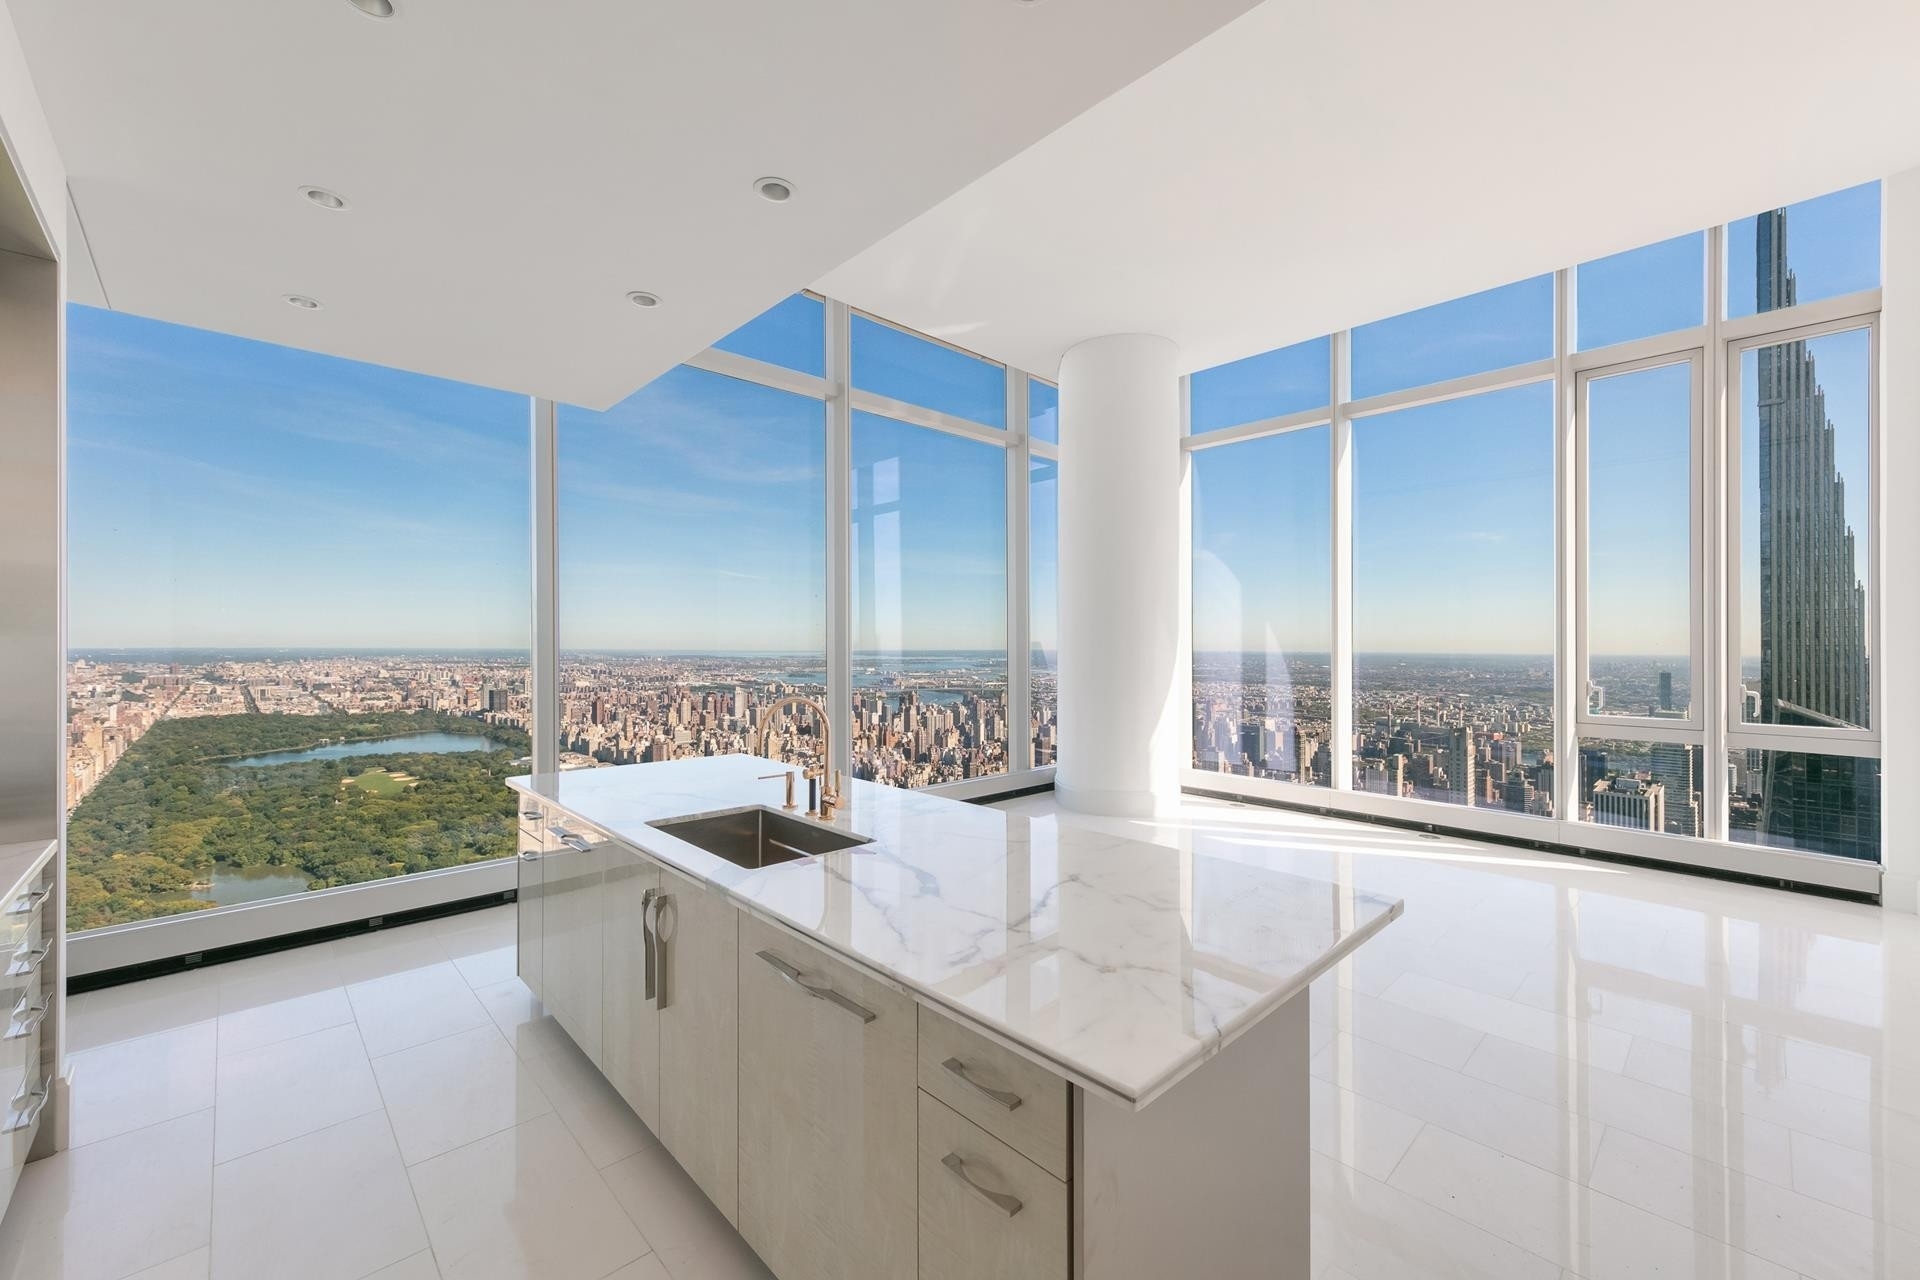 2. Condominiums for Sale at Central Park Tower, 217 W 57TH ST, 97E Midtown West, New York, New York 10019